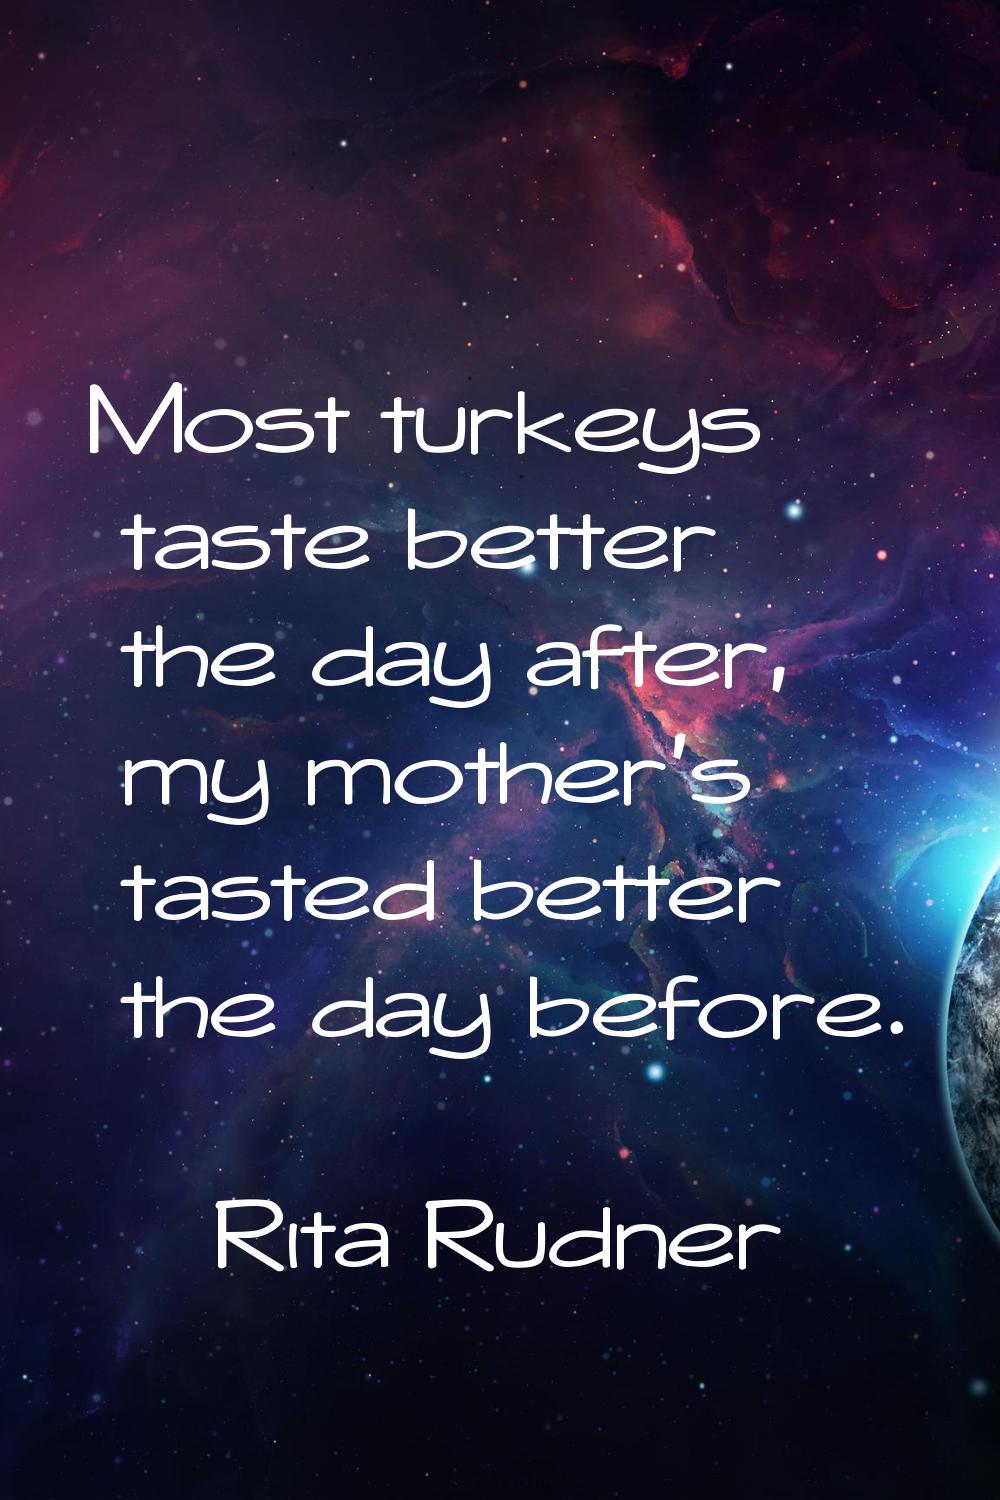 Most turkeys taste better the day after, my mother's tasted better the day before.